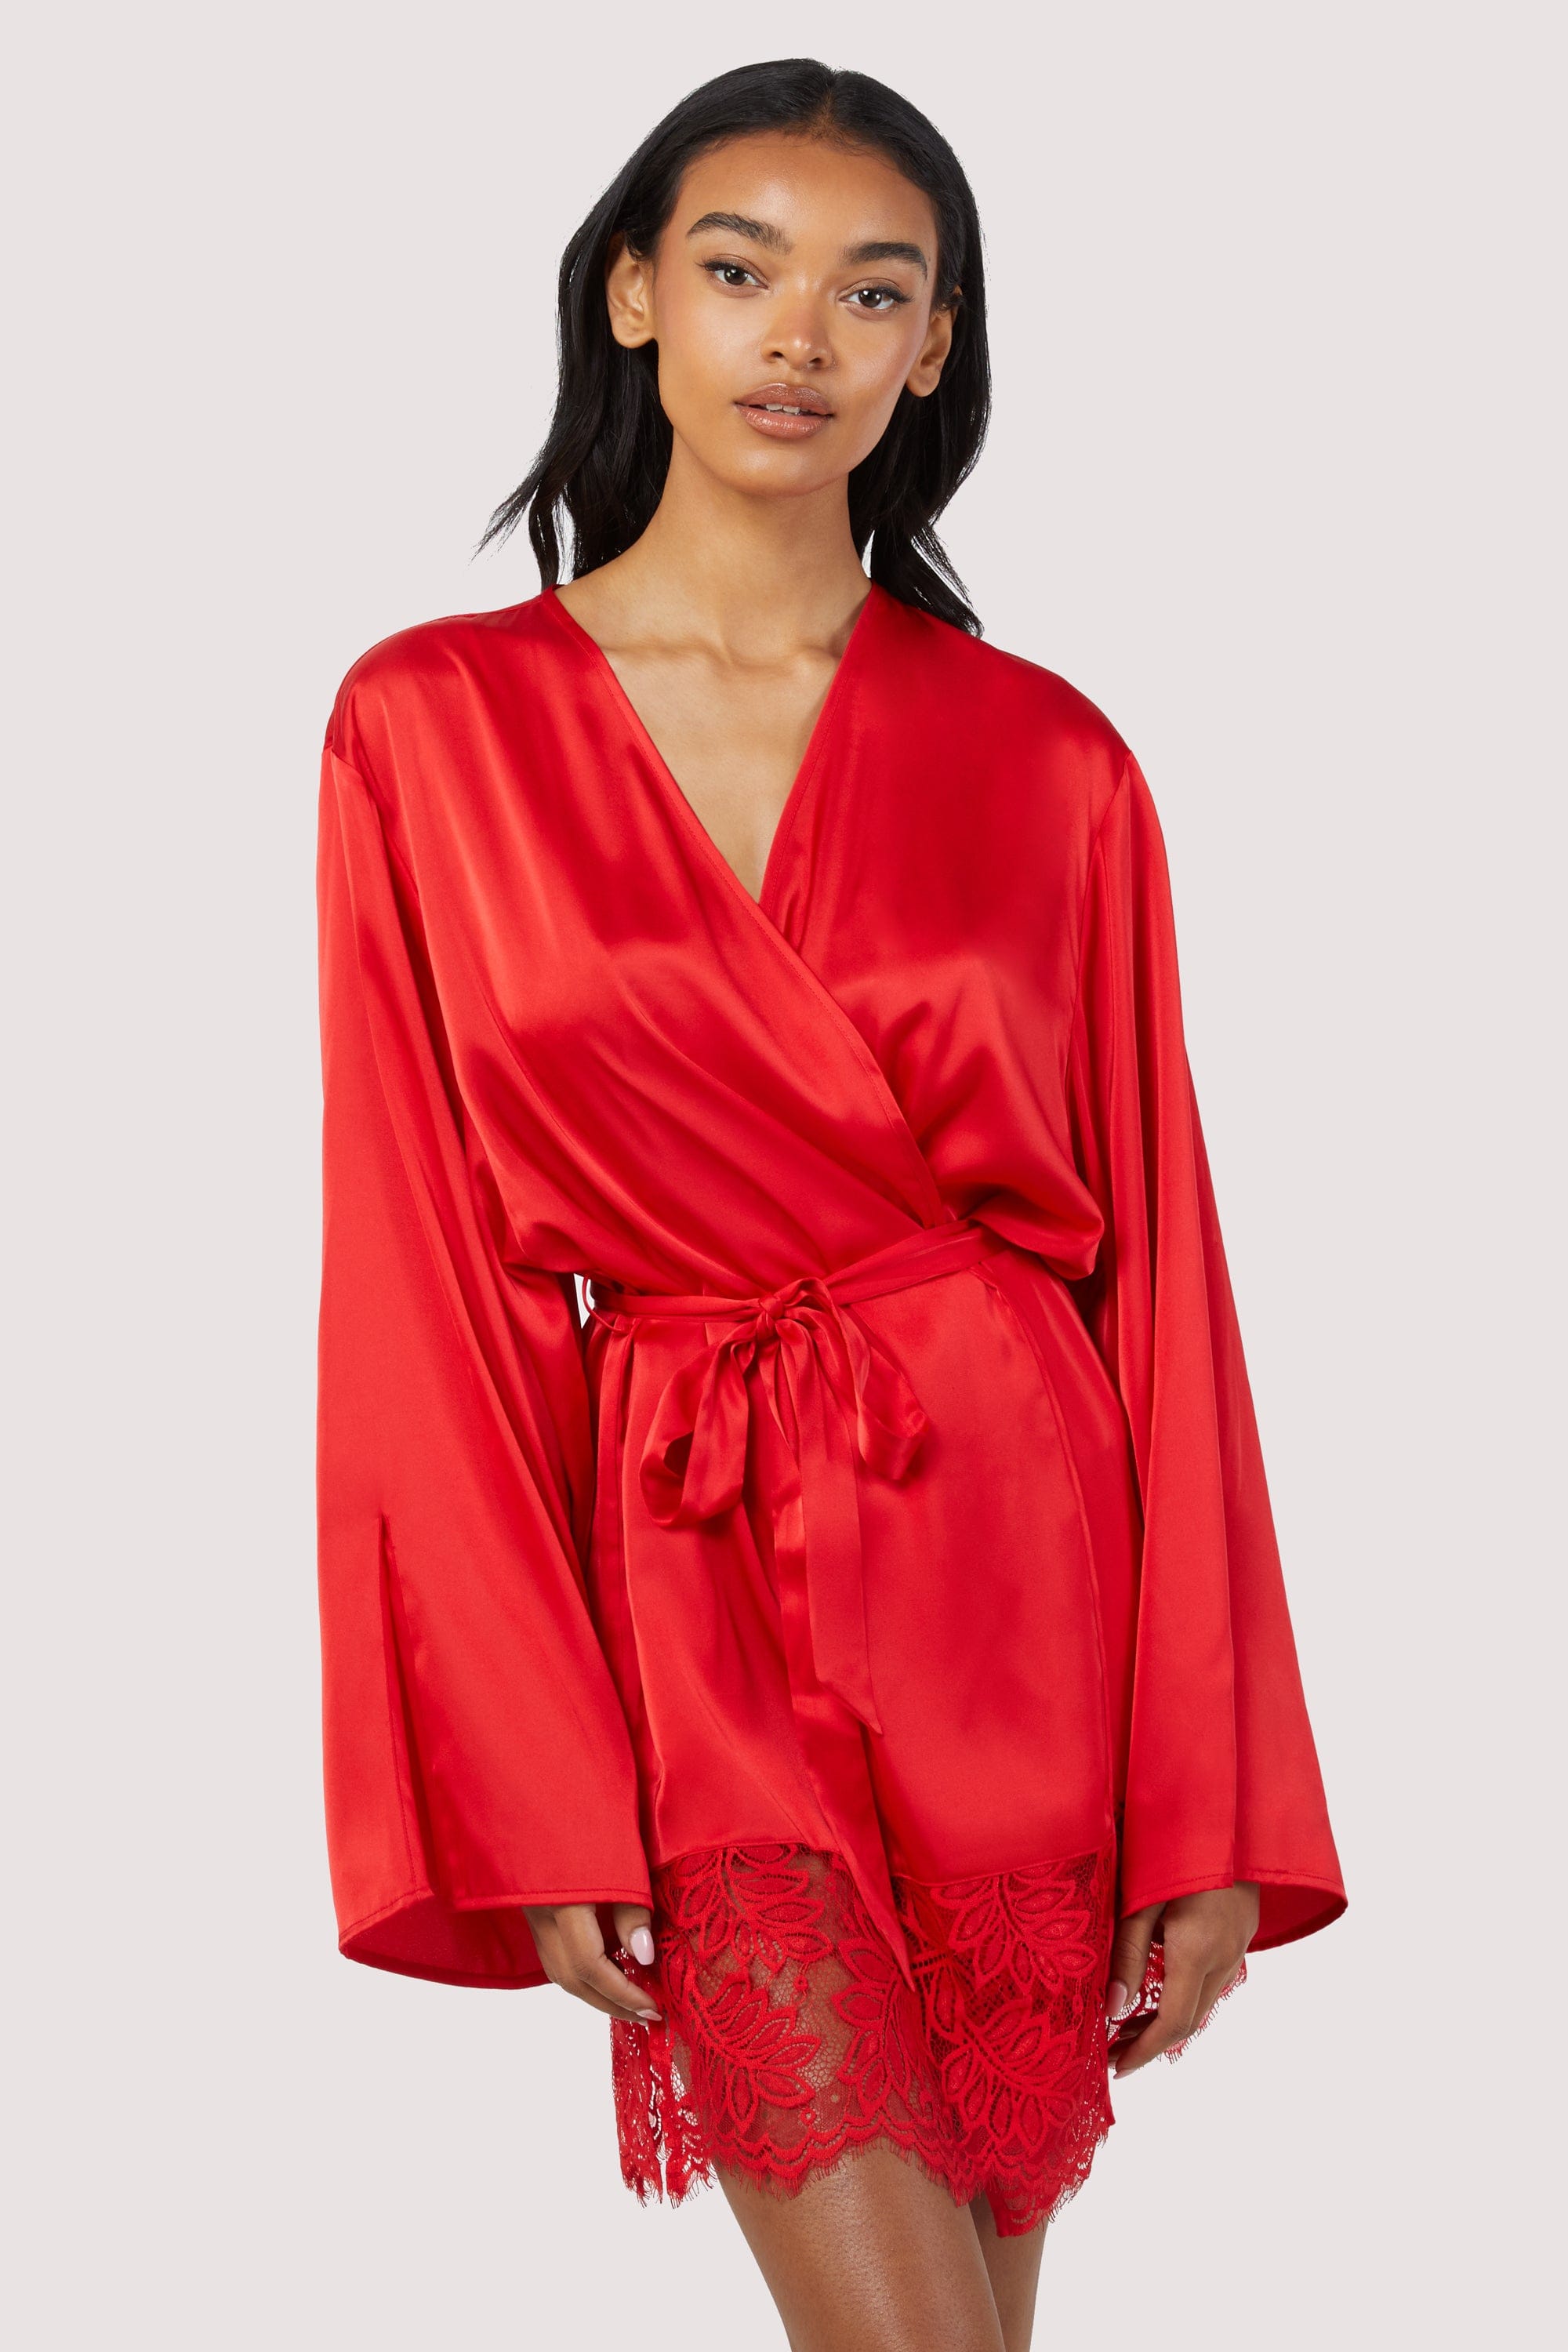 Rosie Red Satin and Lace Robe UK 12